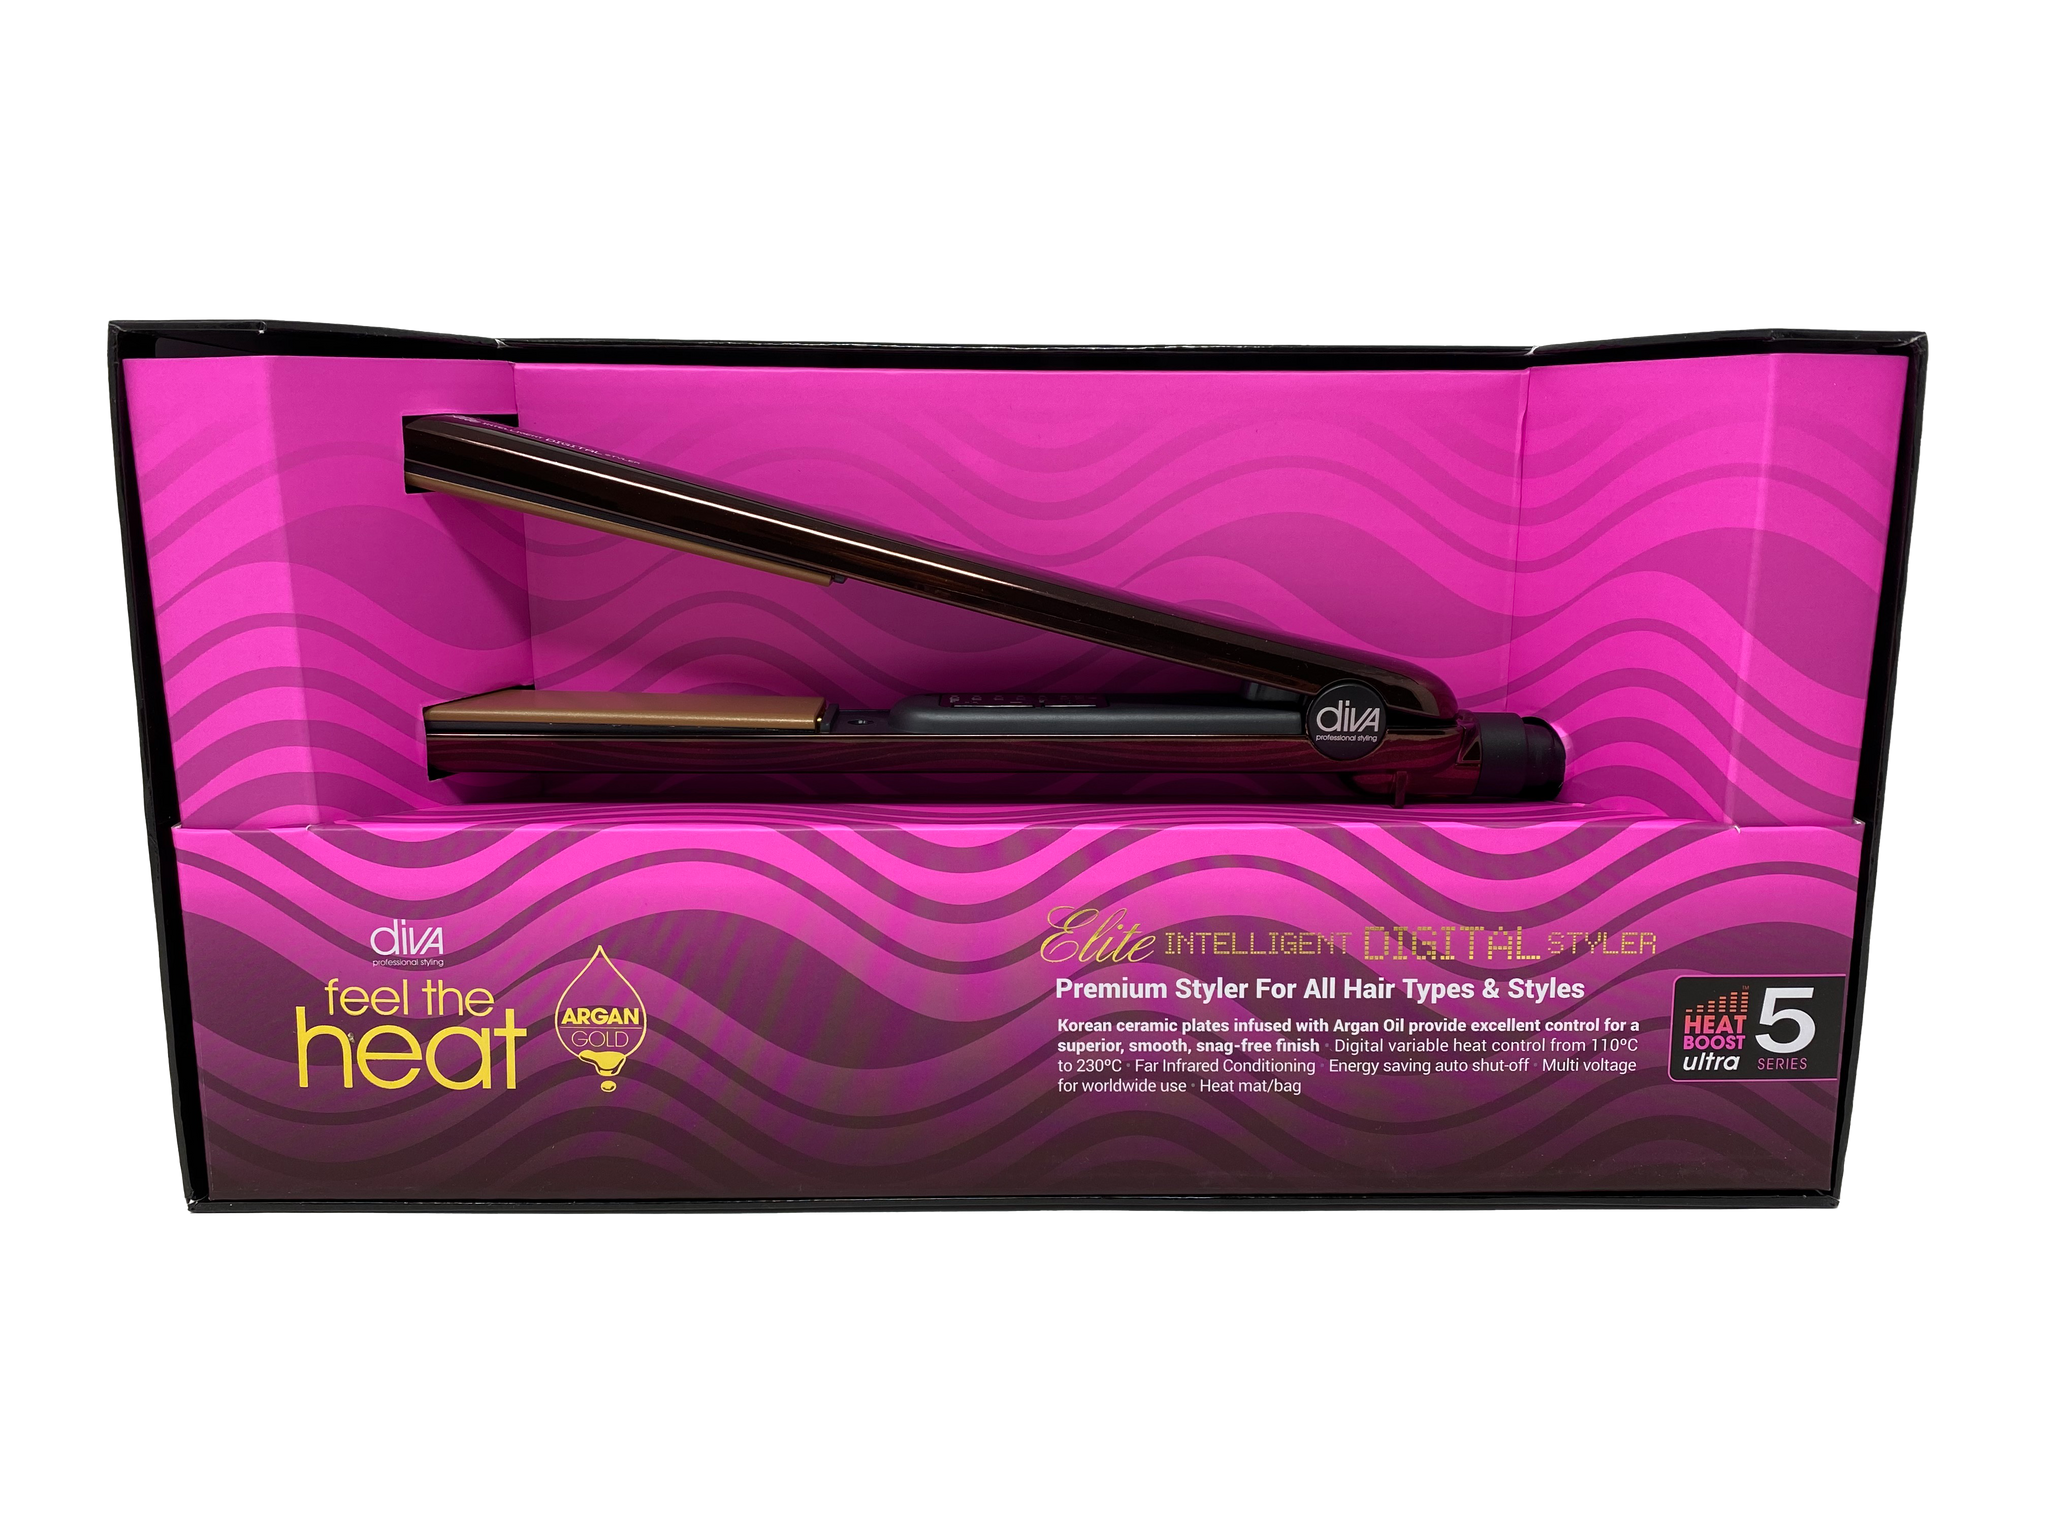 diva the heat hair straighteners,Limited Time